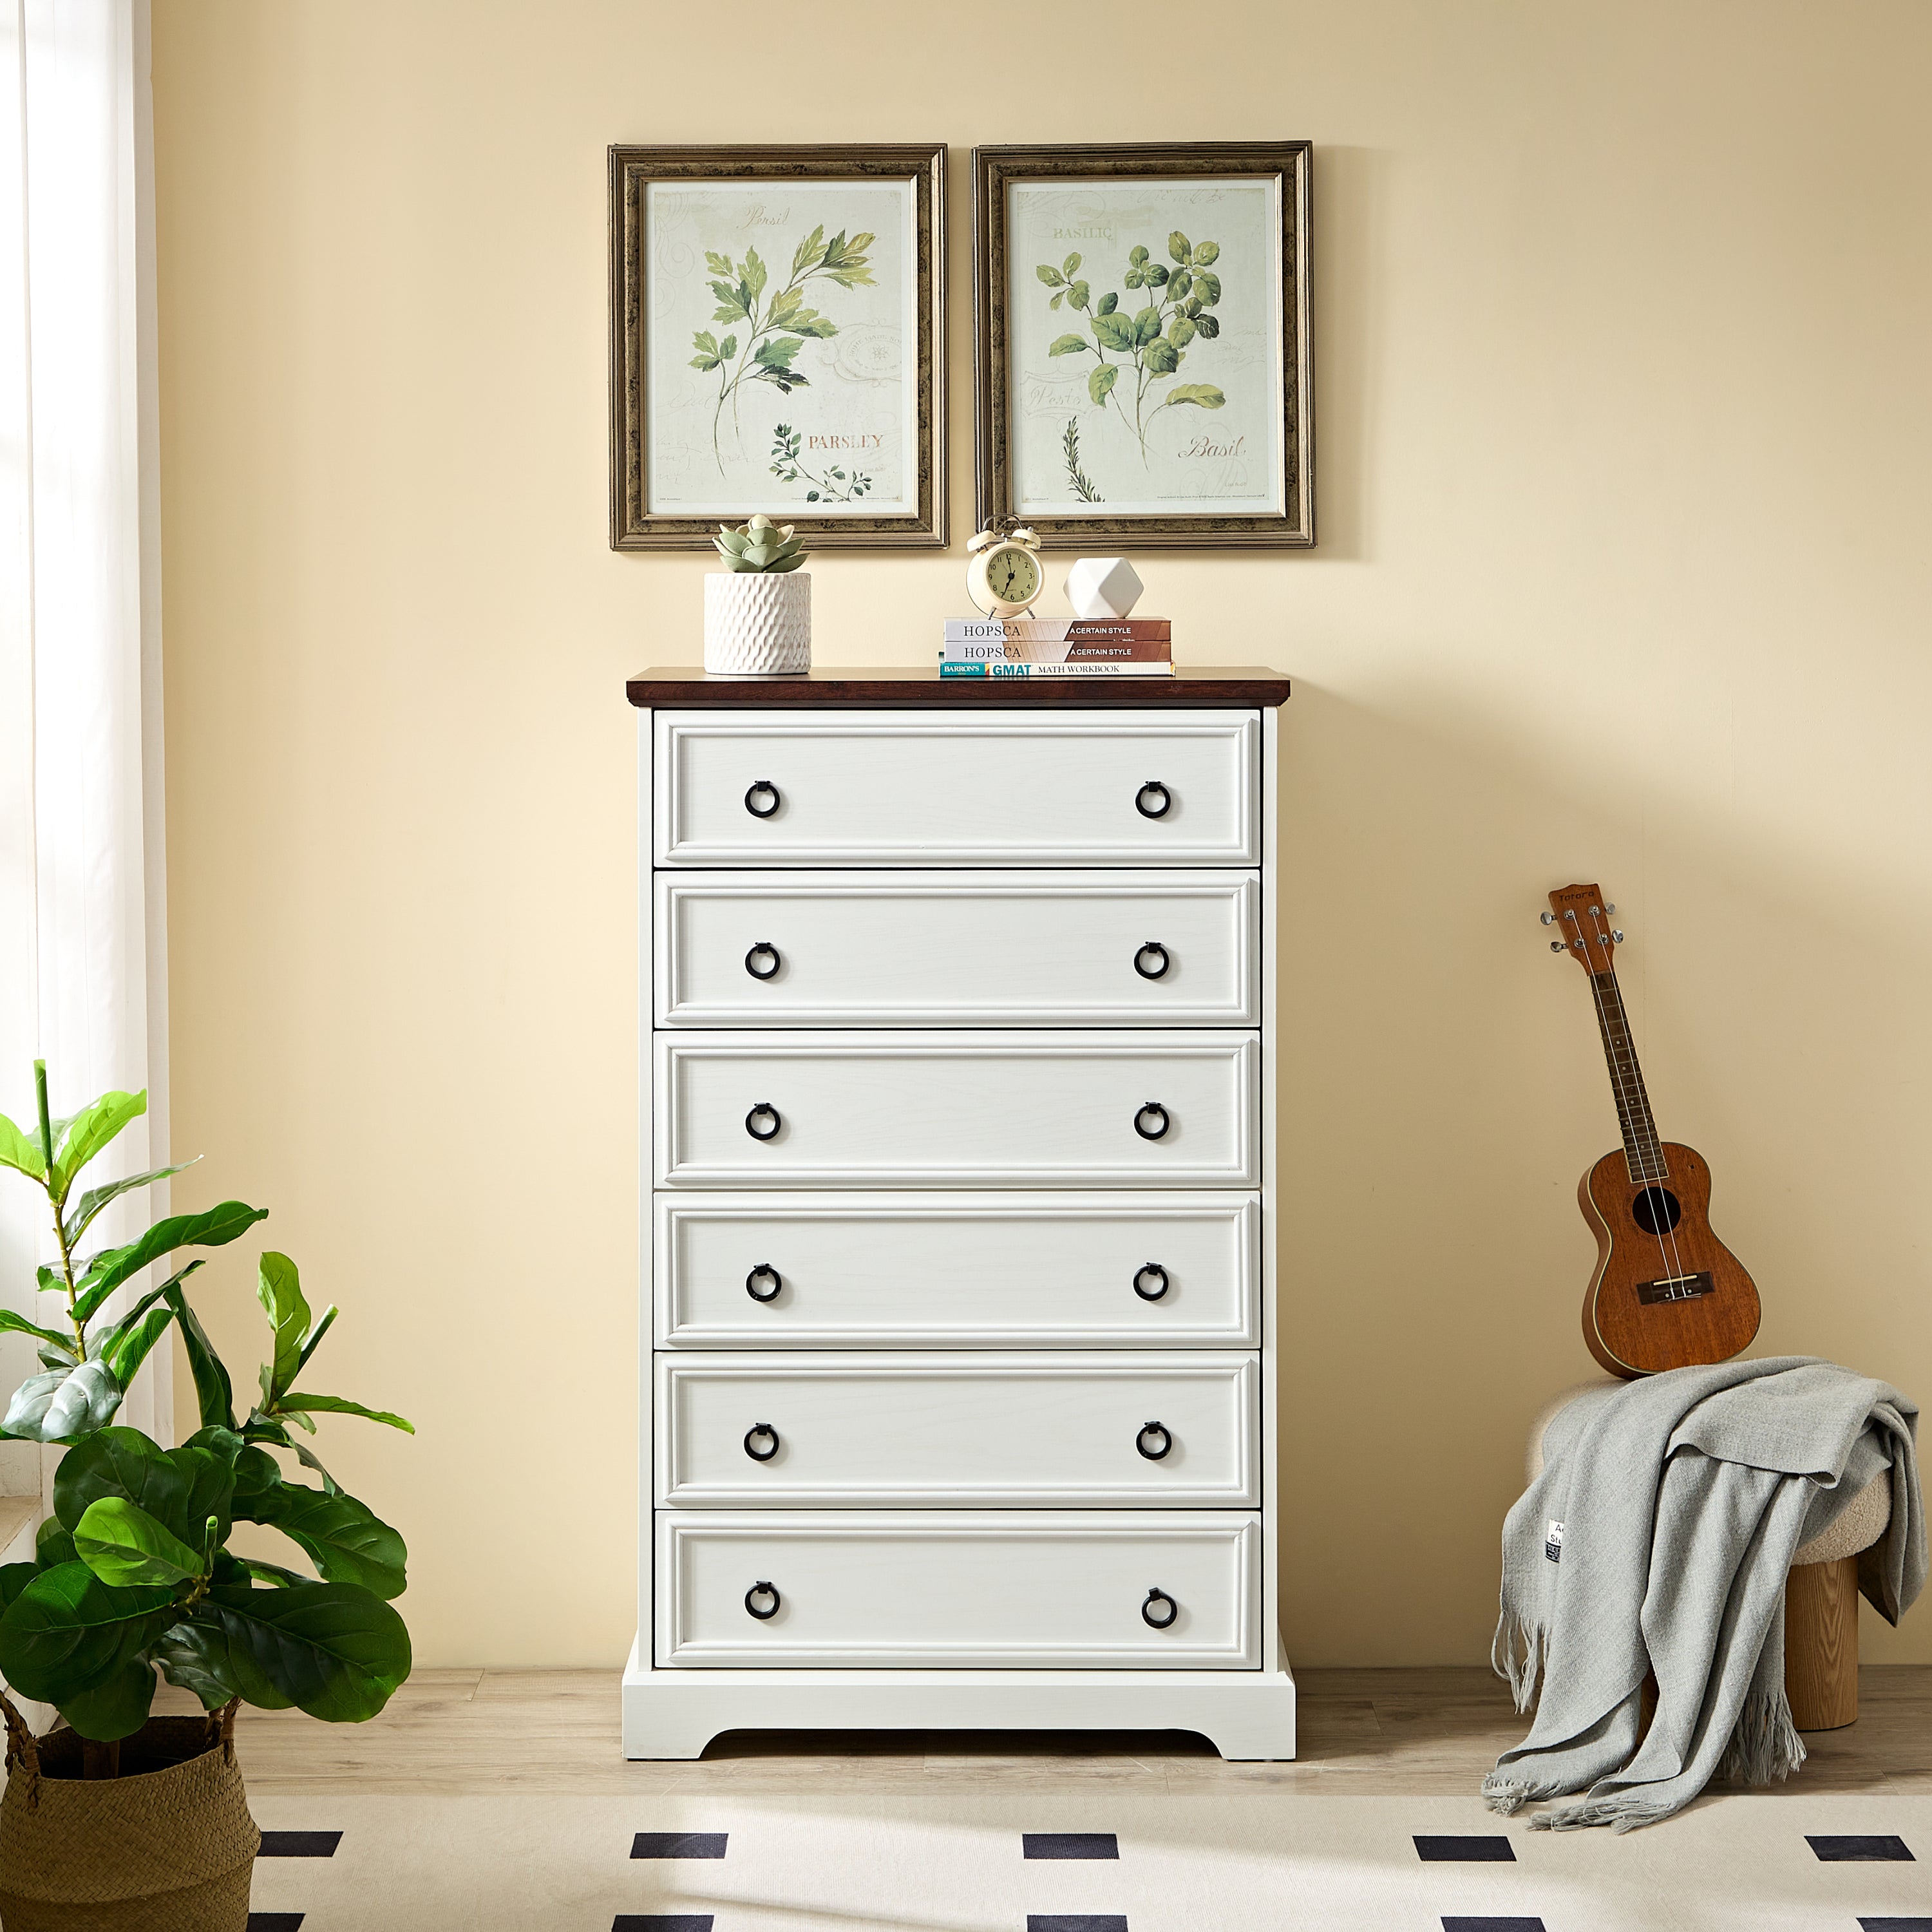 🆓🚛 Modern 6 Drawer Dresser, Dressers for Bedroom, Tall Chest of Drawers Closet Organizers & Storage Clothes - Easy Pull Handle, Textured Borders Living Room, Hallway, L 29.53''Xw15.75''Xh48.03''White